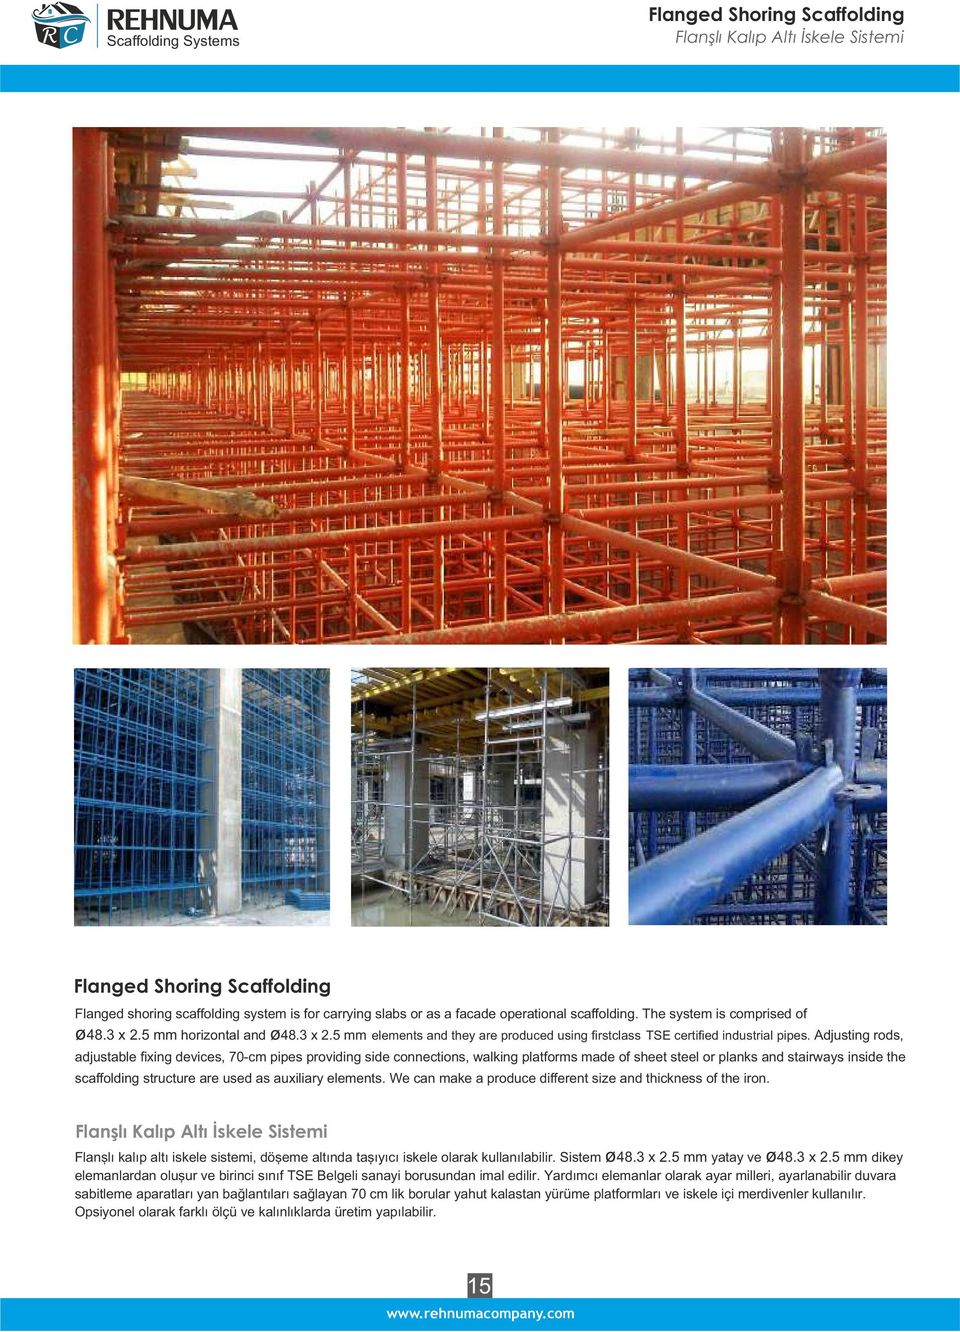 Adjusting rods, adjustable fixing devices, 70-cm pipes providing side connections, walking platforms made of sheet steel or planks and stairways inside the scaffolding structure are used as auxiliary